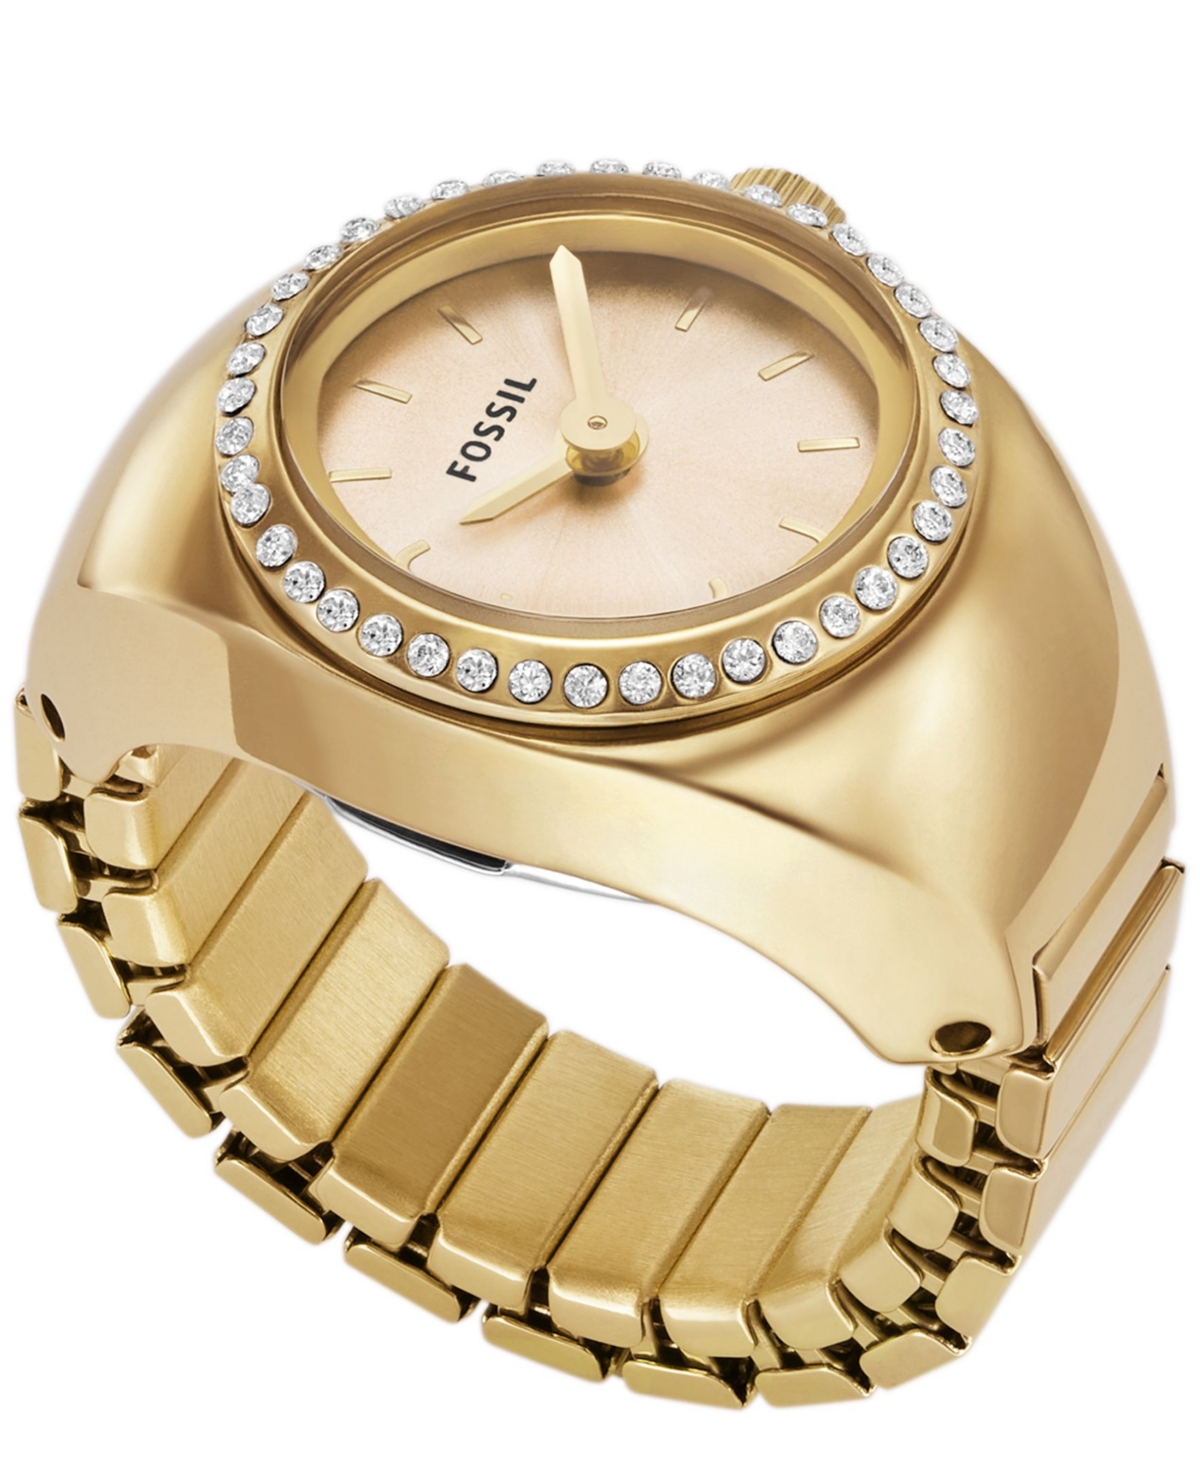 Fossil Women's Watch Ring Two-hand Gold-tone Stainless Steel 15mm